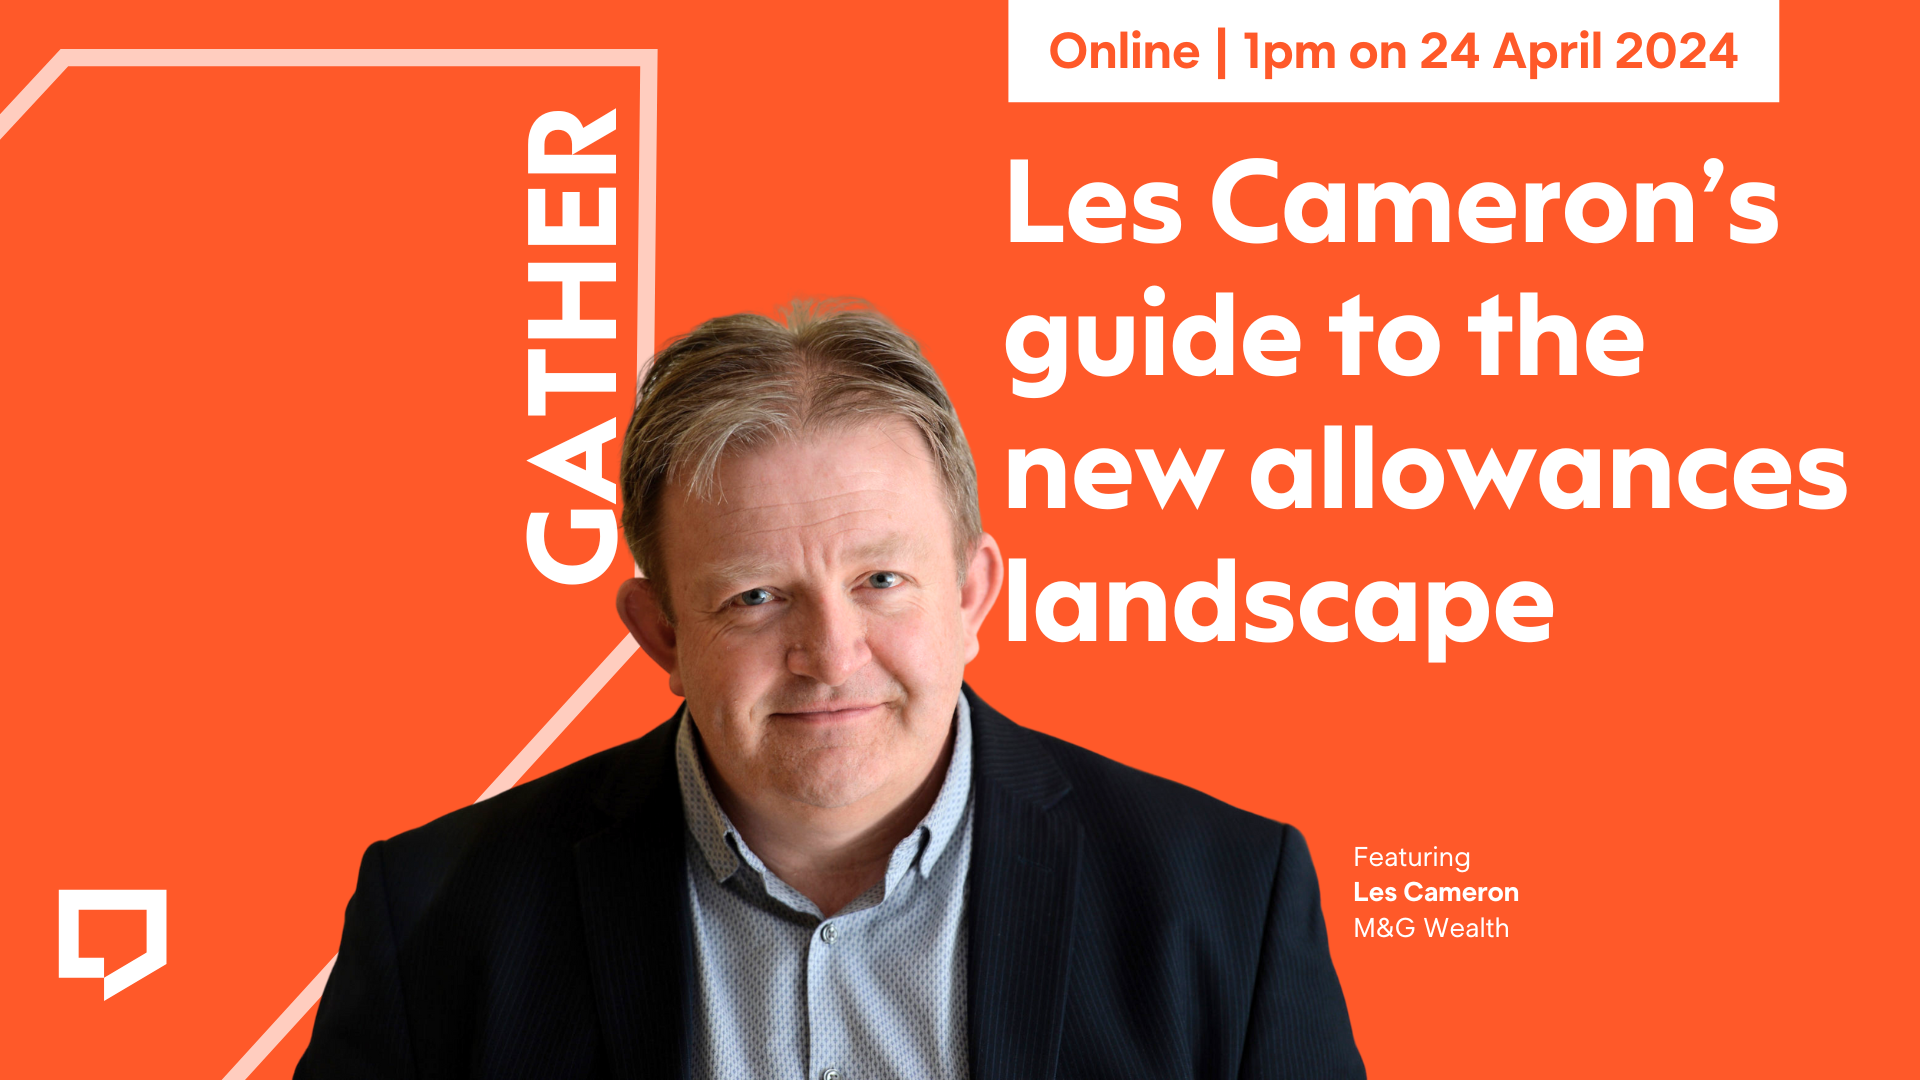 Online. 1pm on 24 April 2024. Les Cameron's guide to the new allowances landscape featuring Les Cameron of M&G Wealth